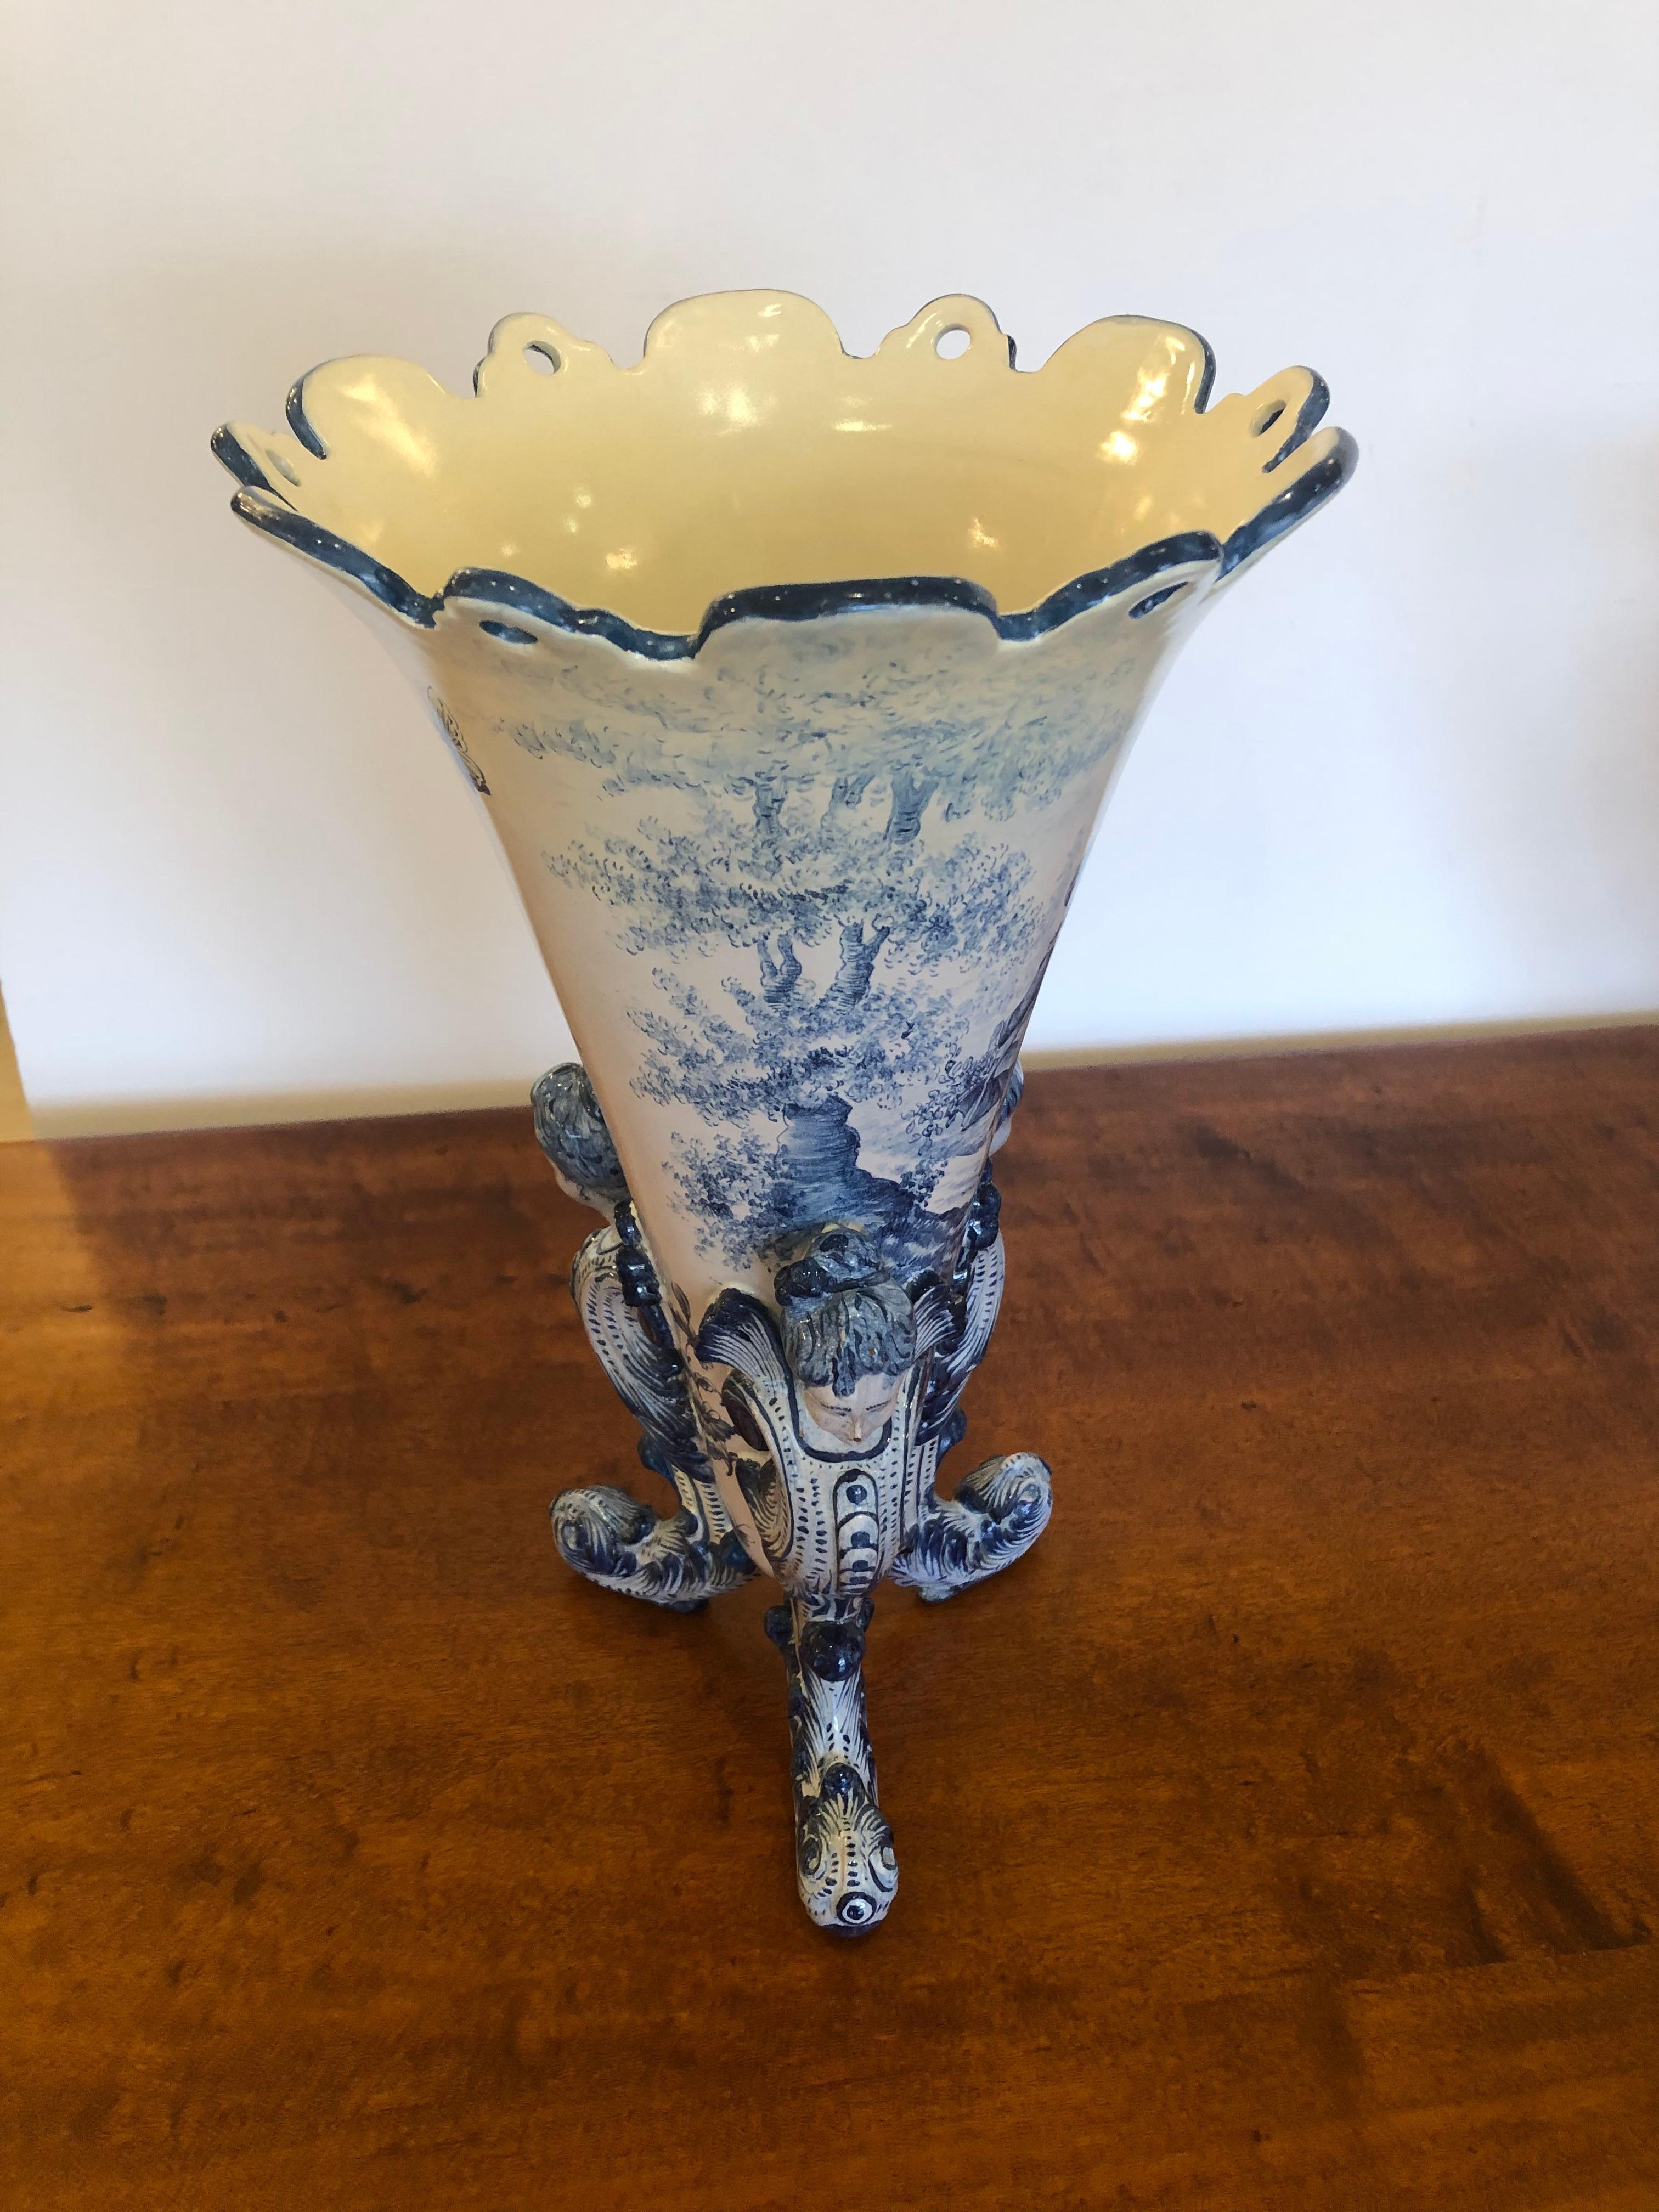 Impressive large and beautifully made Italian ceramic vase having blue and white meticulous painting of figures and landscape with tripod base made of 3 enchanting figurehead women. The top is delightfully scalloped.